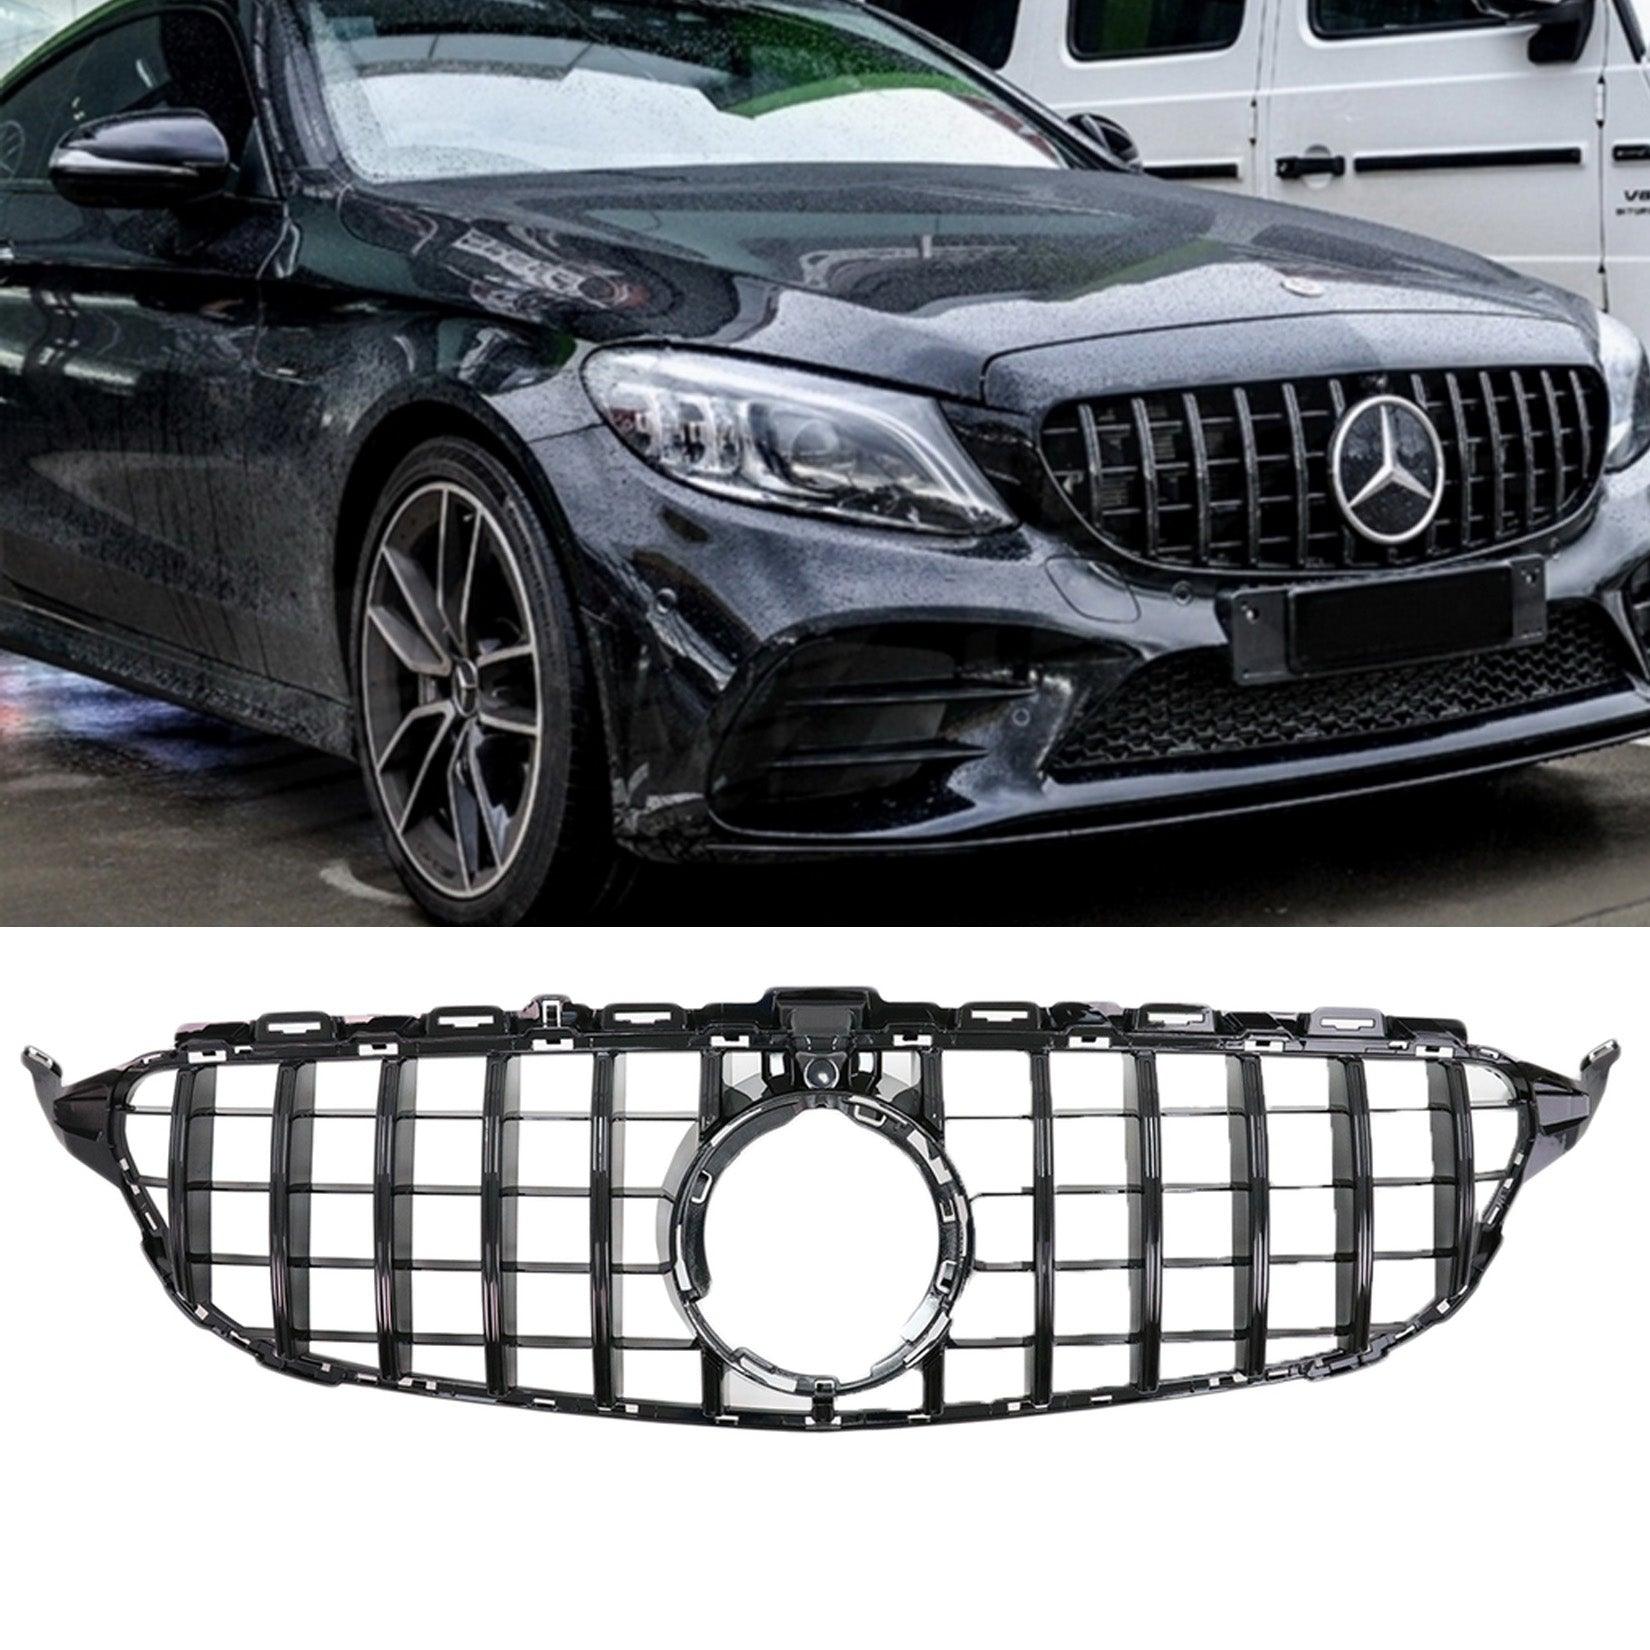 MERCEDES C-CLASS W205 FACELIFT 2018-2020 - FRONT GRILL - PANAMERICANA GT-R STYLE - ALL BLACK - RisperStyling